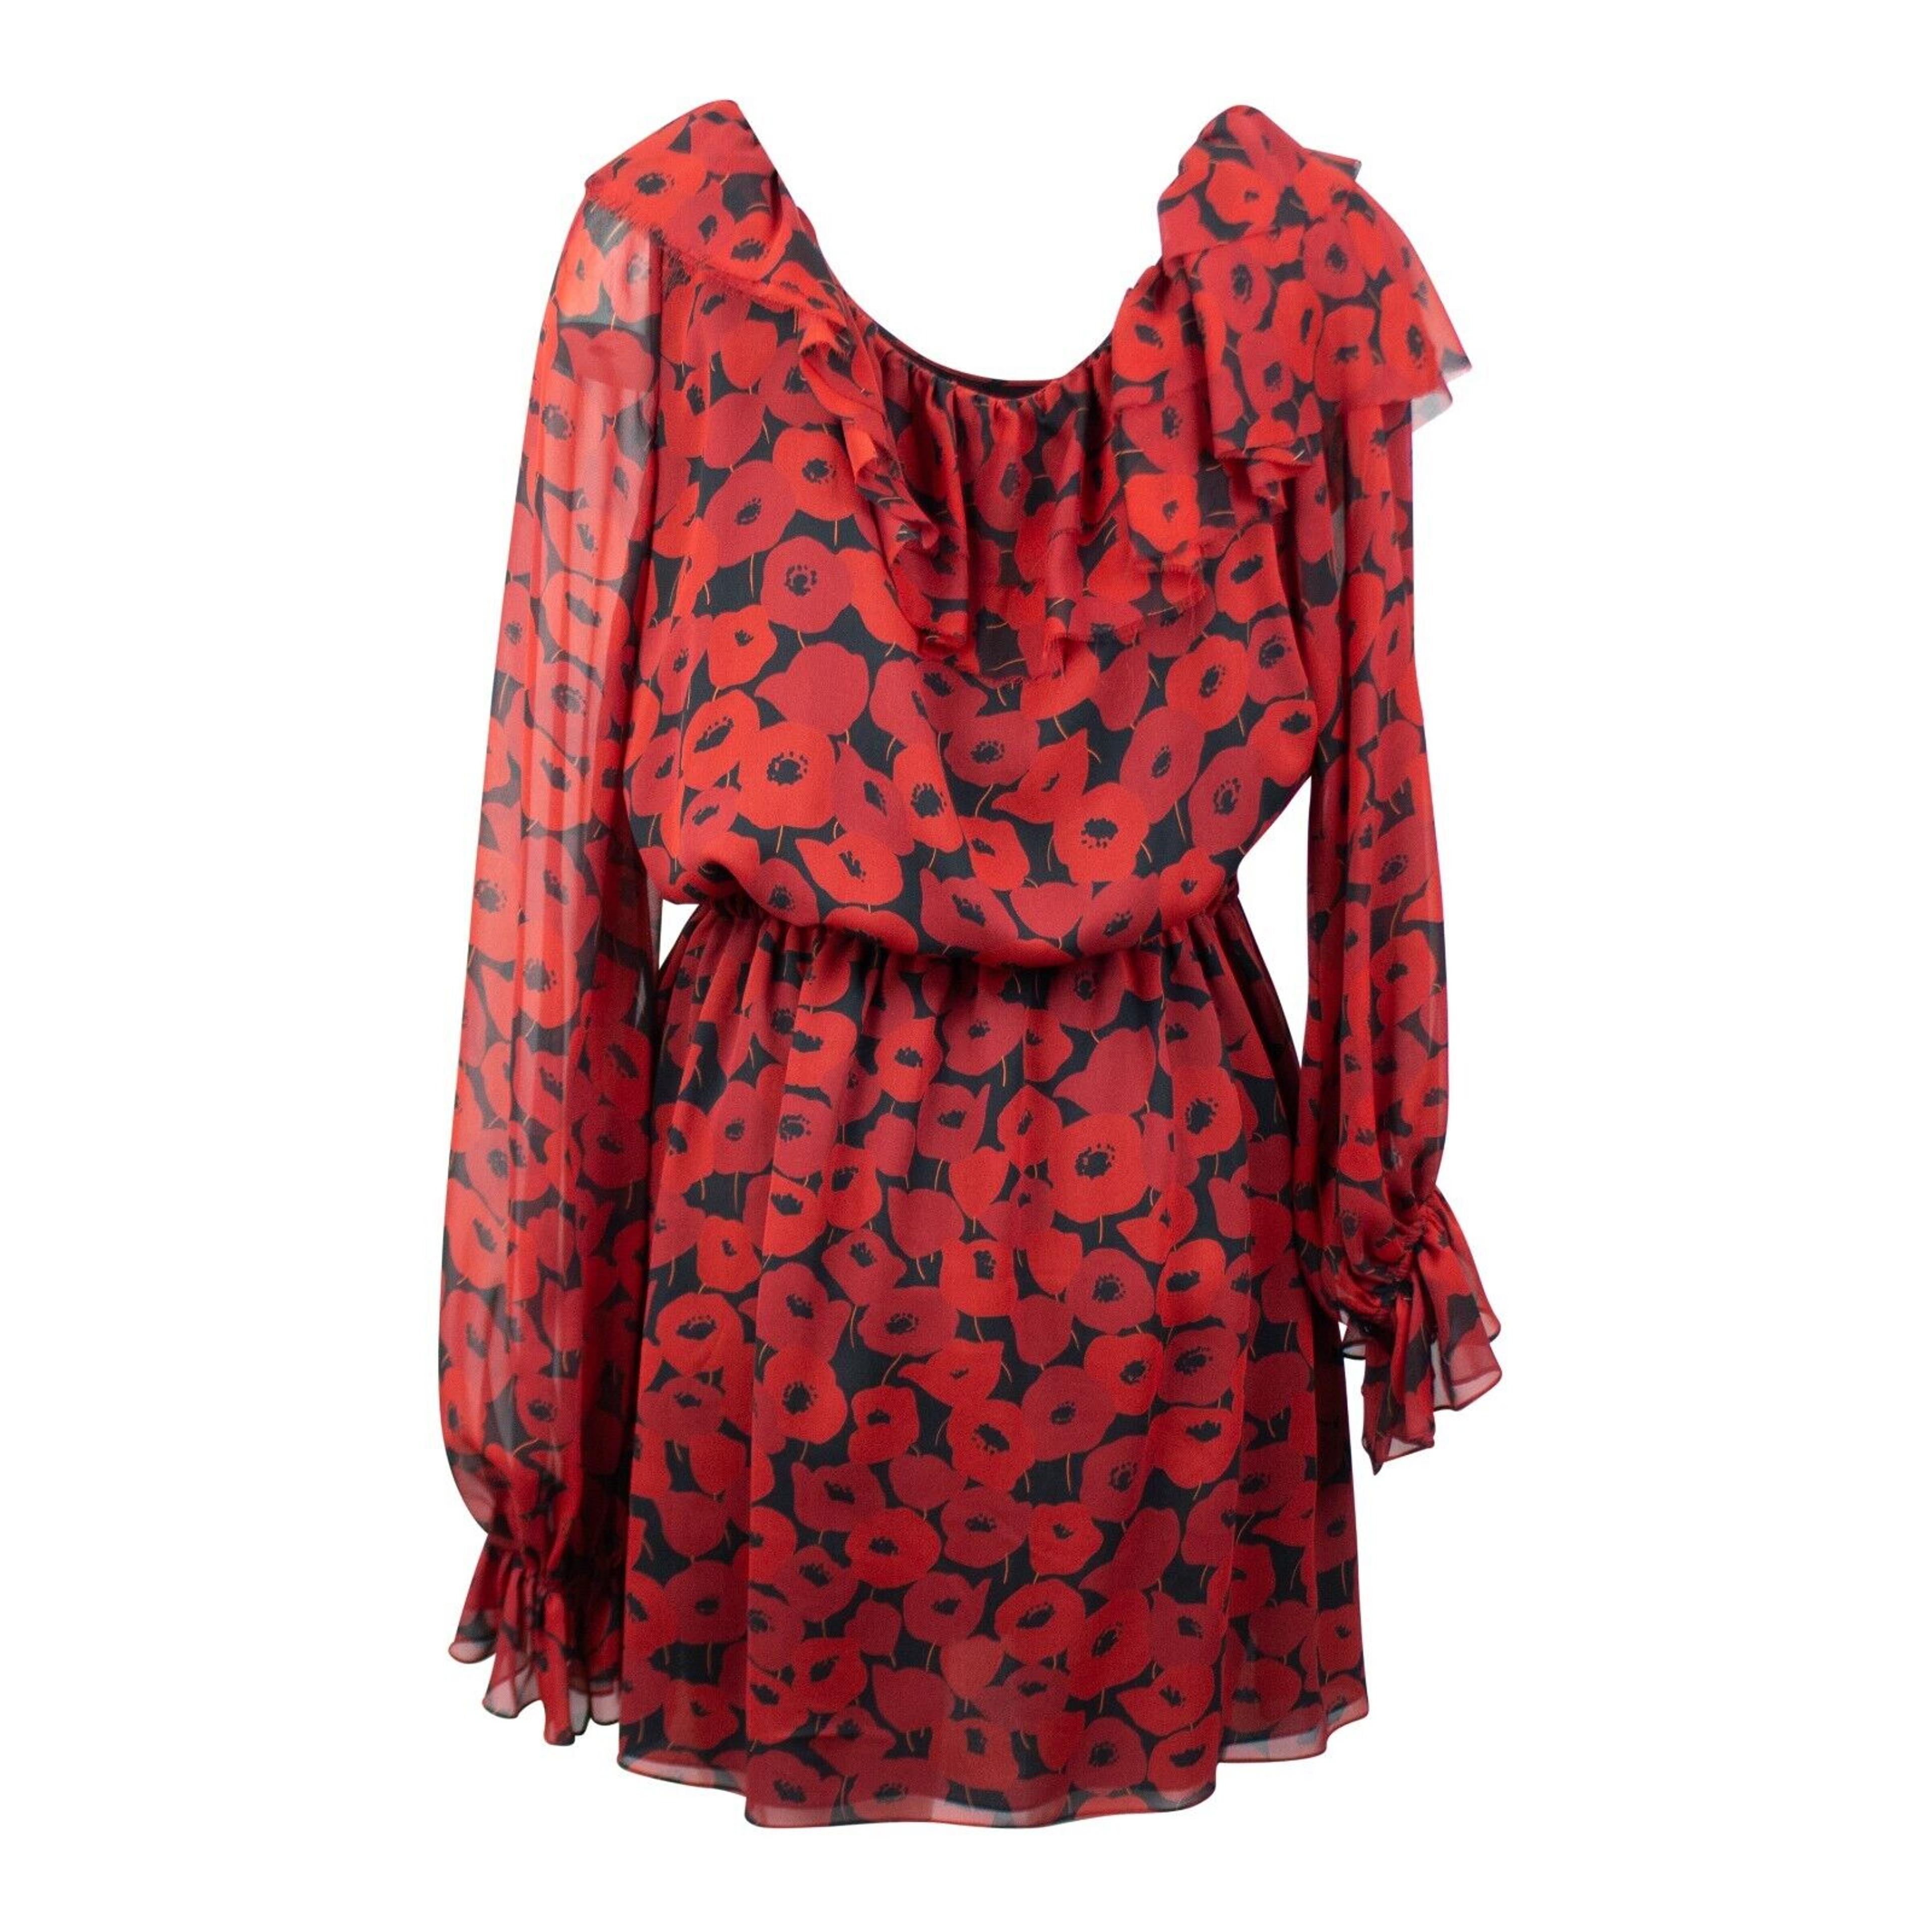 Alternate View 4 of Women's Red Off The Shoulder Floral Dress